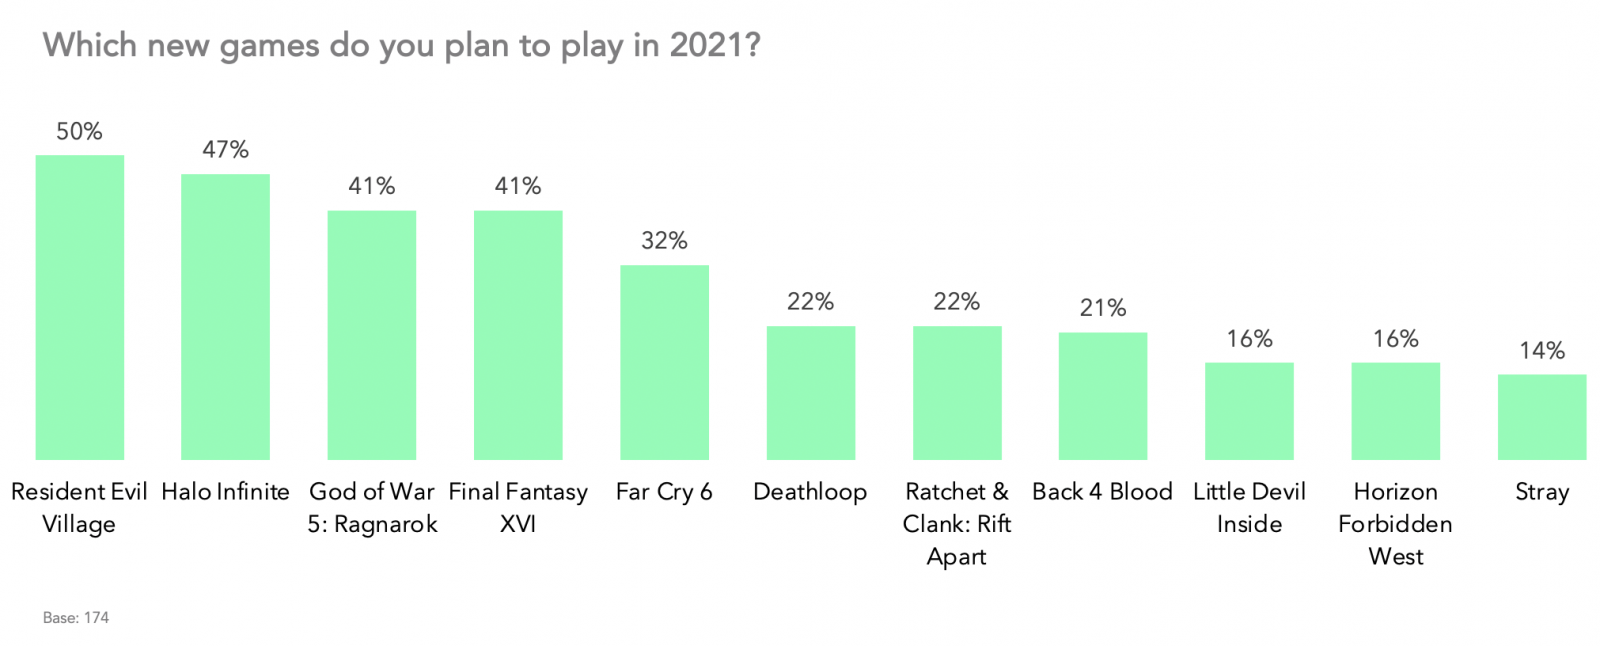 Which new games do you plan to play in 2021?